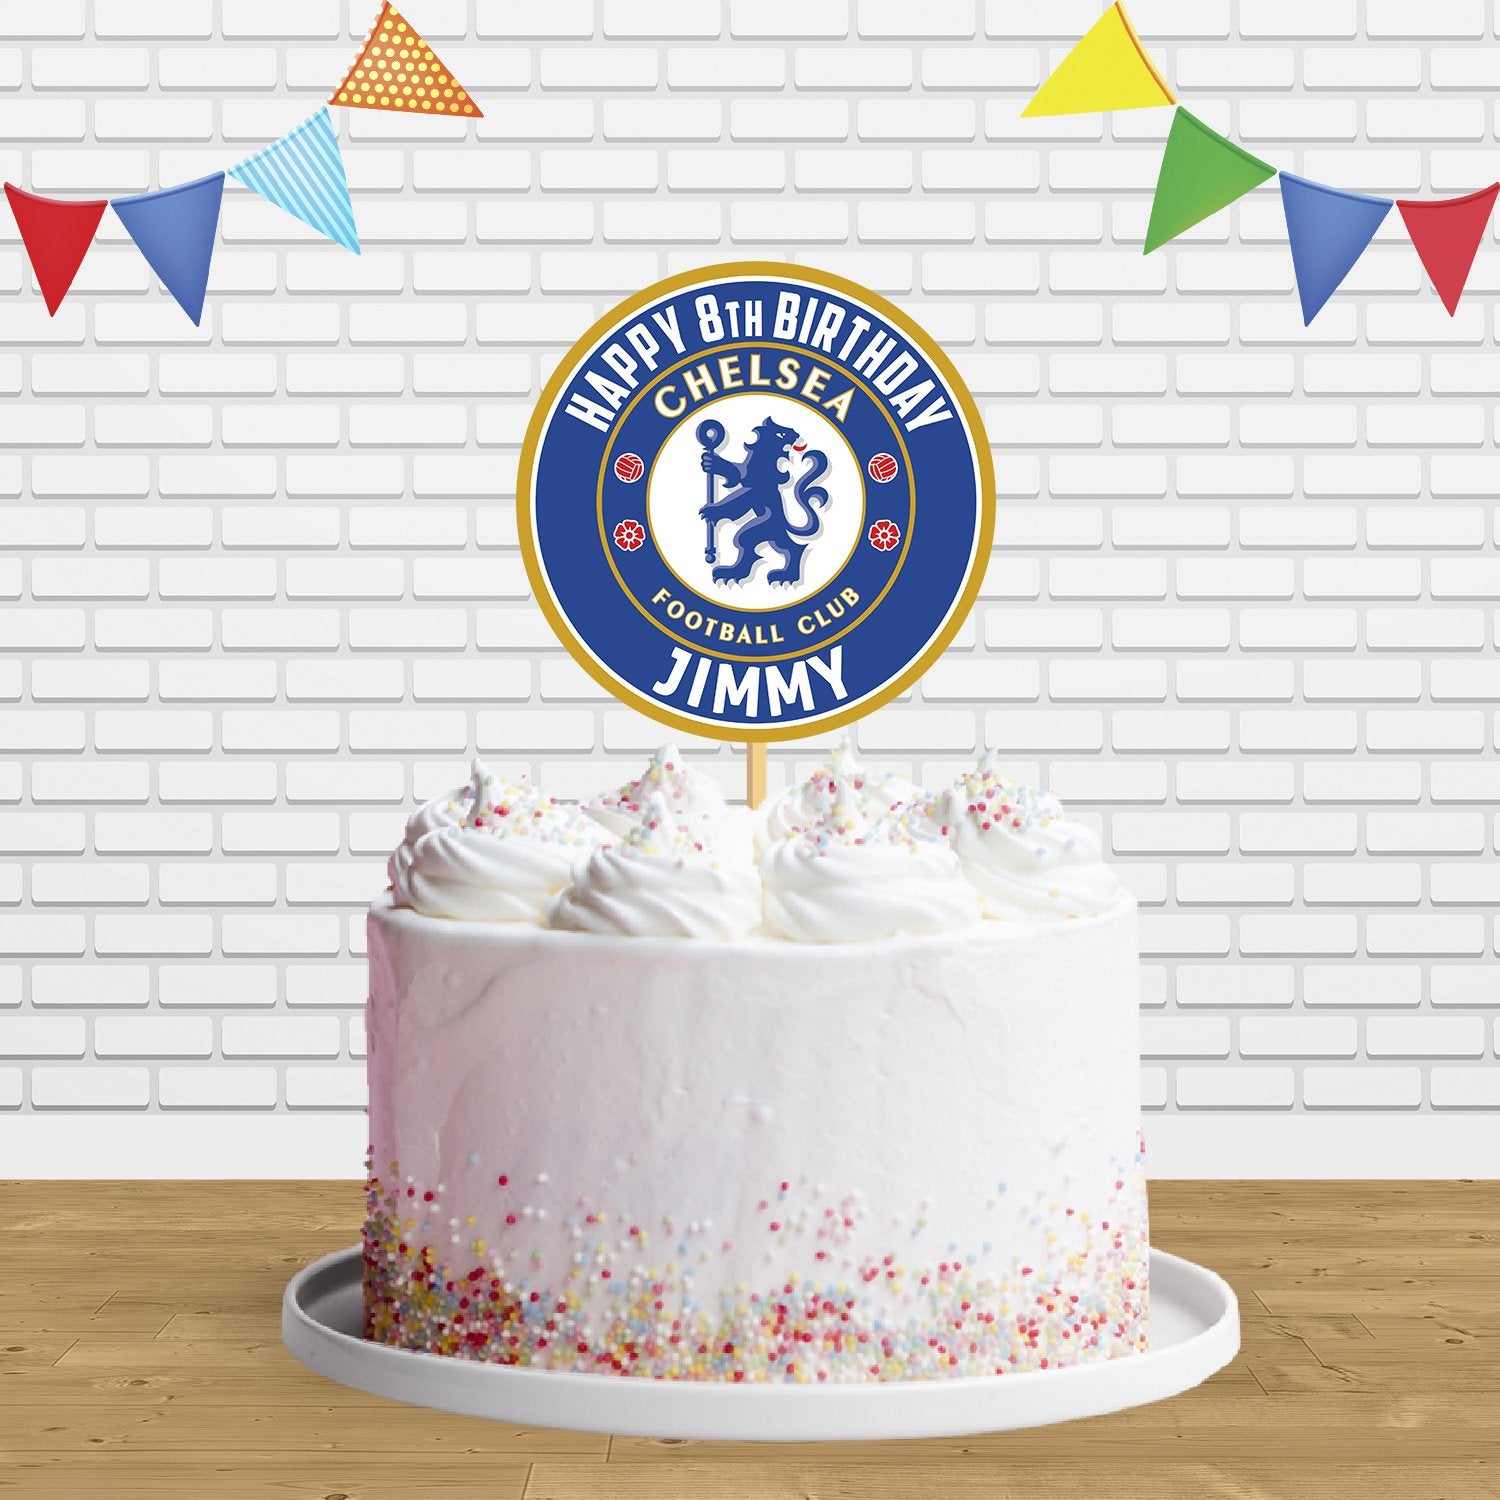 Details more than 135 chelsea football cake decorations - in.eteachers